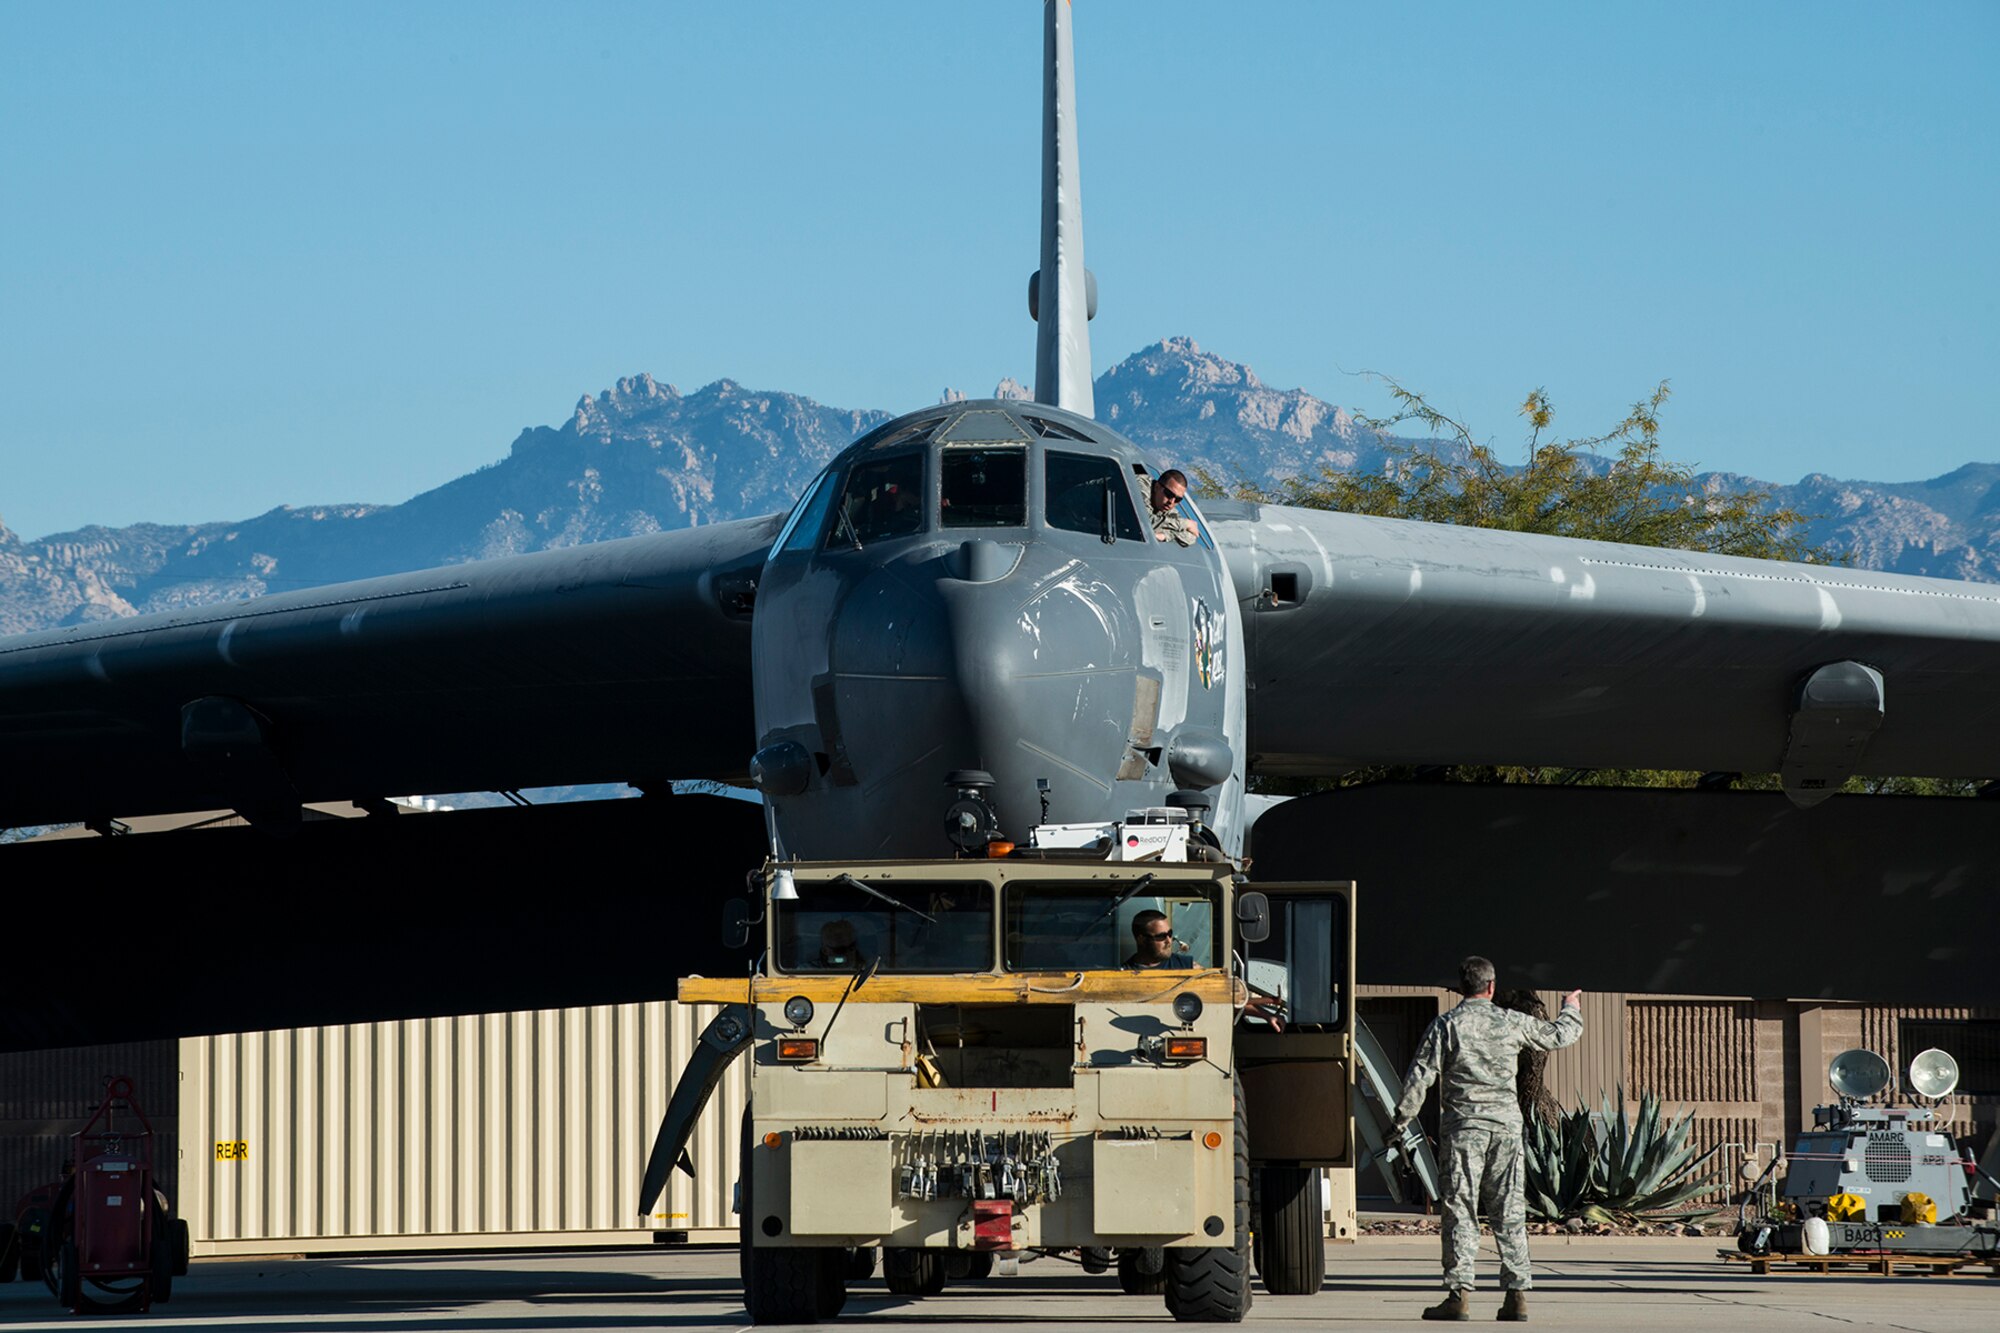 A U.S. Air Force B-52 Stratofortress is towed from a maintenance area at the 309th Aerospace Maintenance and Regeneration Group, Feb. 11, 2015, Davis-Monthan Air Force Base, Ariz. The aircraft, tail number 61-1007 and known as the "Ghost Rider", is being regenerated for active servie after sitting in storage since 2008 when it was decommssioned and sent the Boneyard. (U.S. Air Force photo by Master Sgt. Greg Steele/Released)